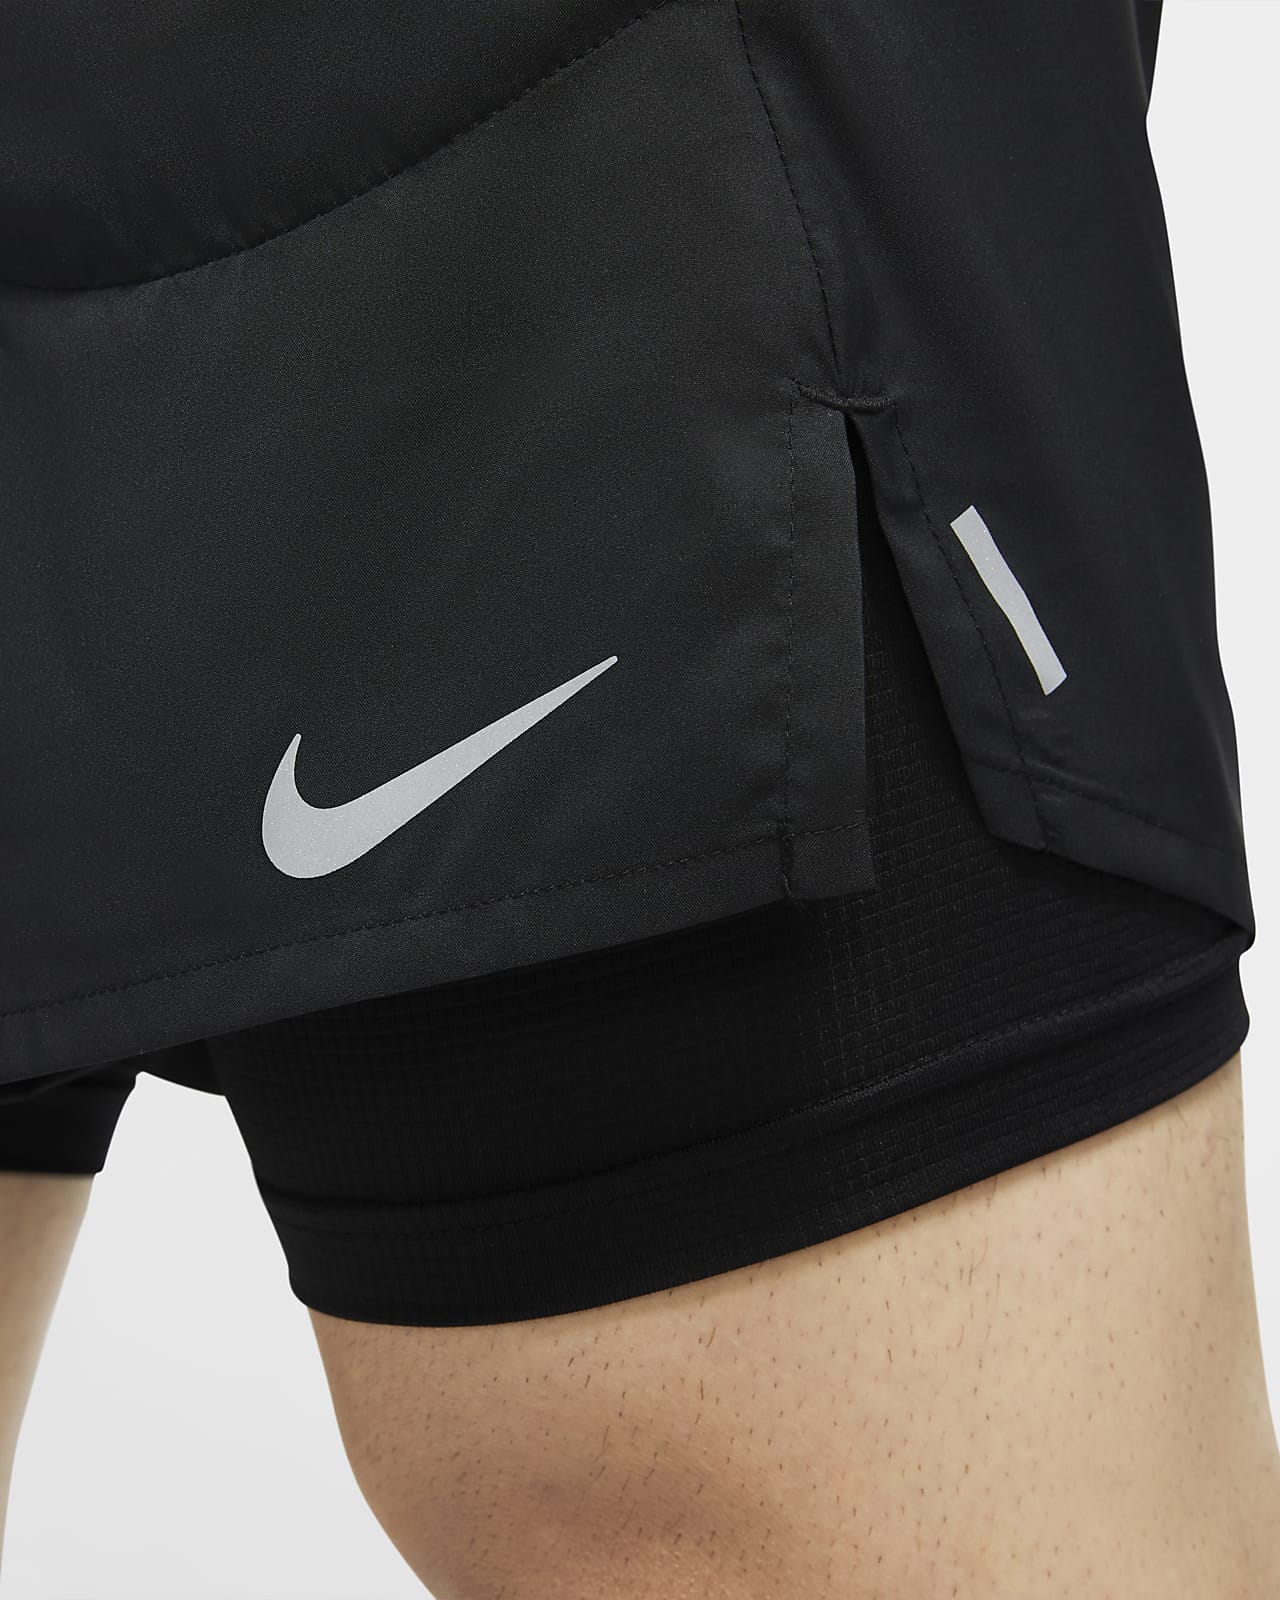 men's nike dri fit running shorts with liner